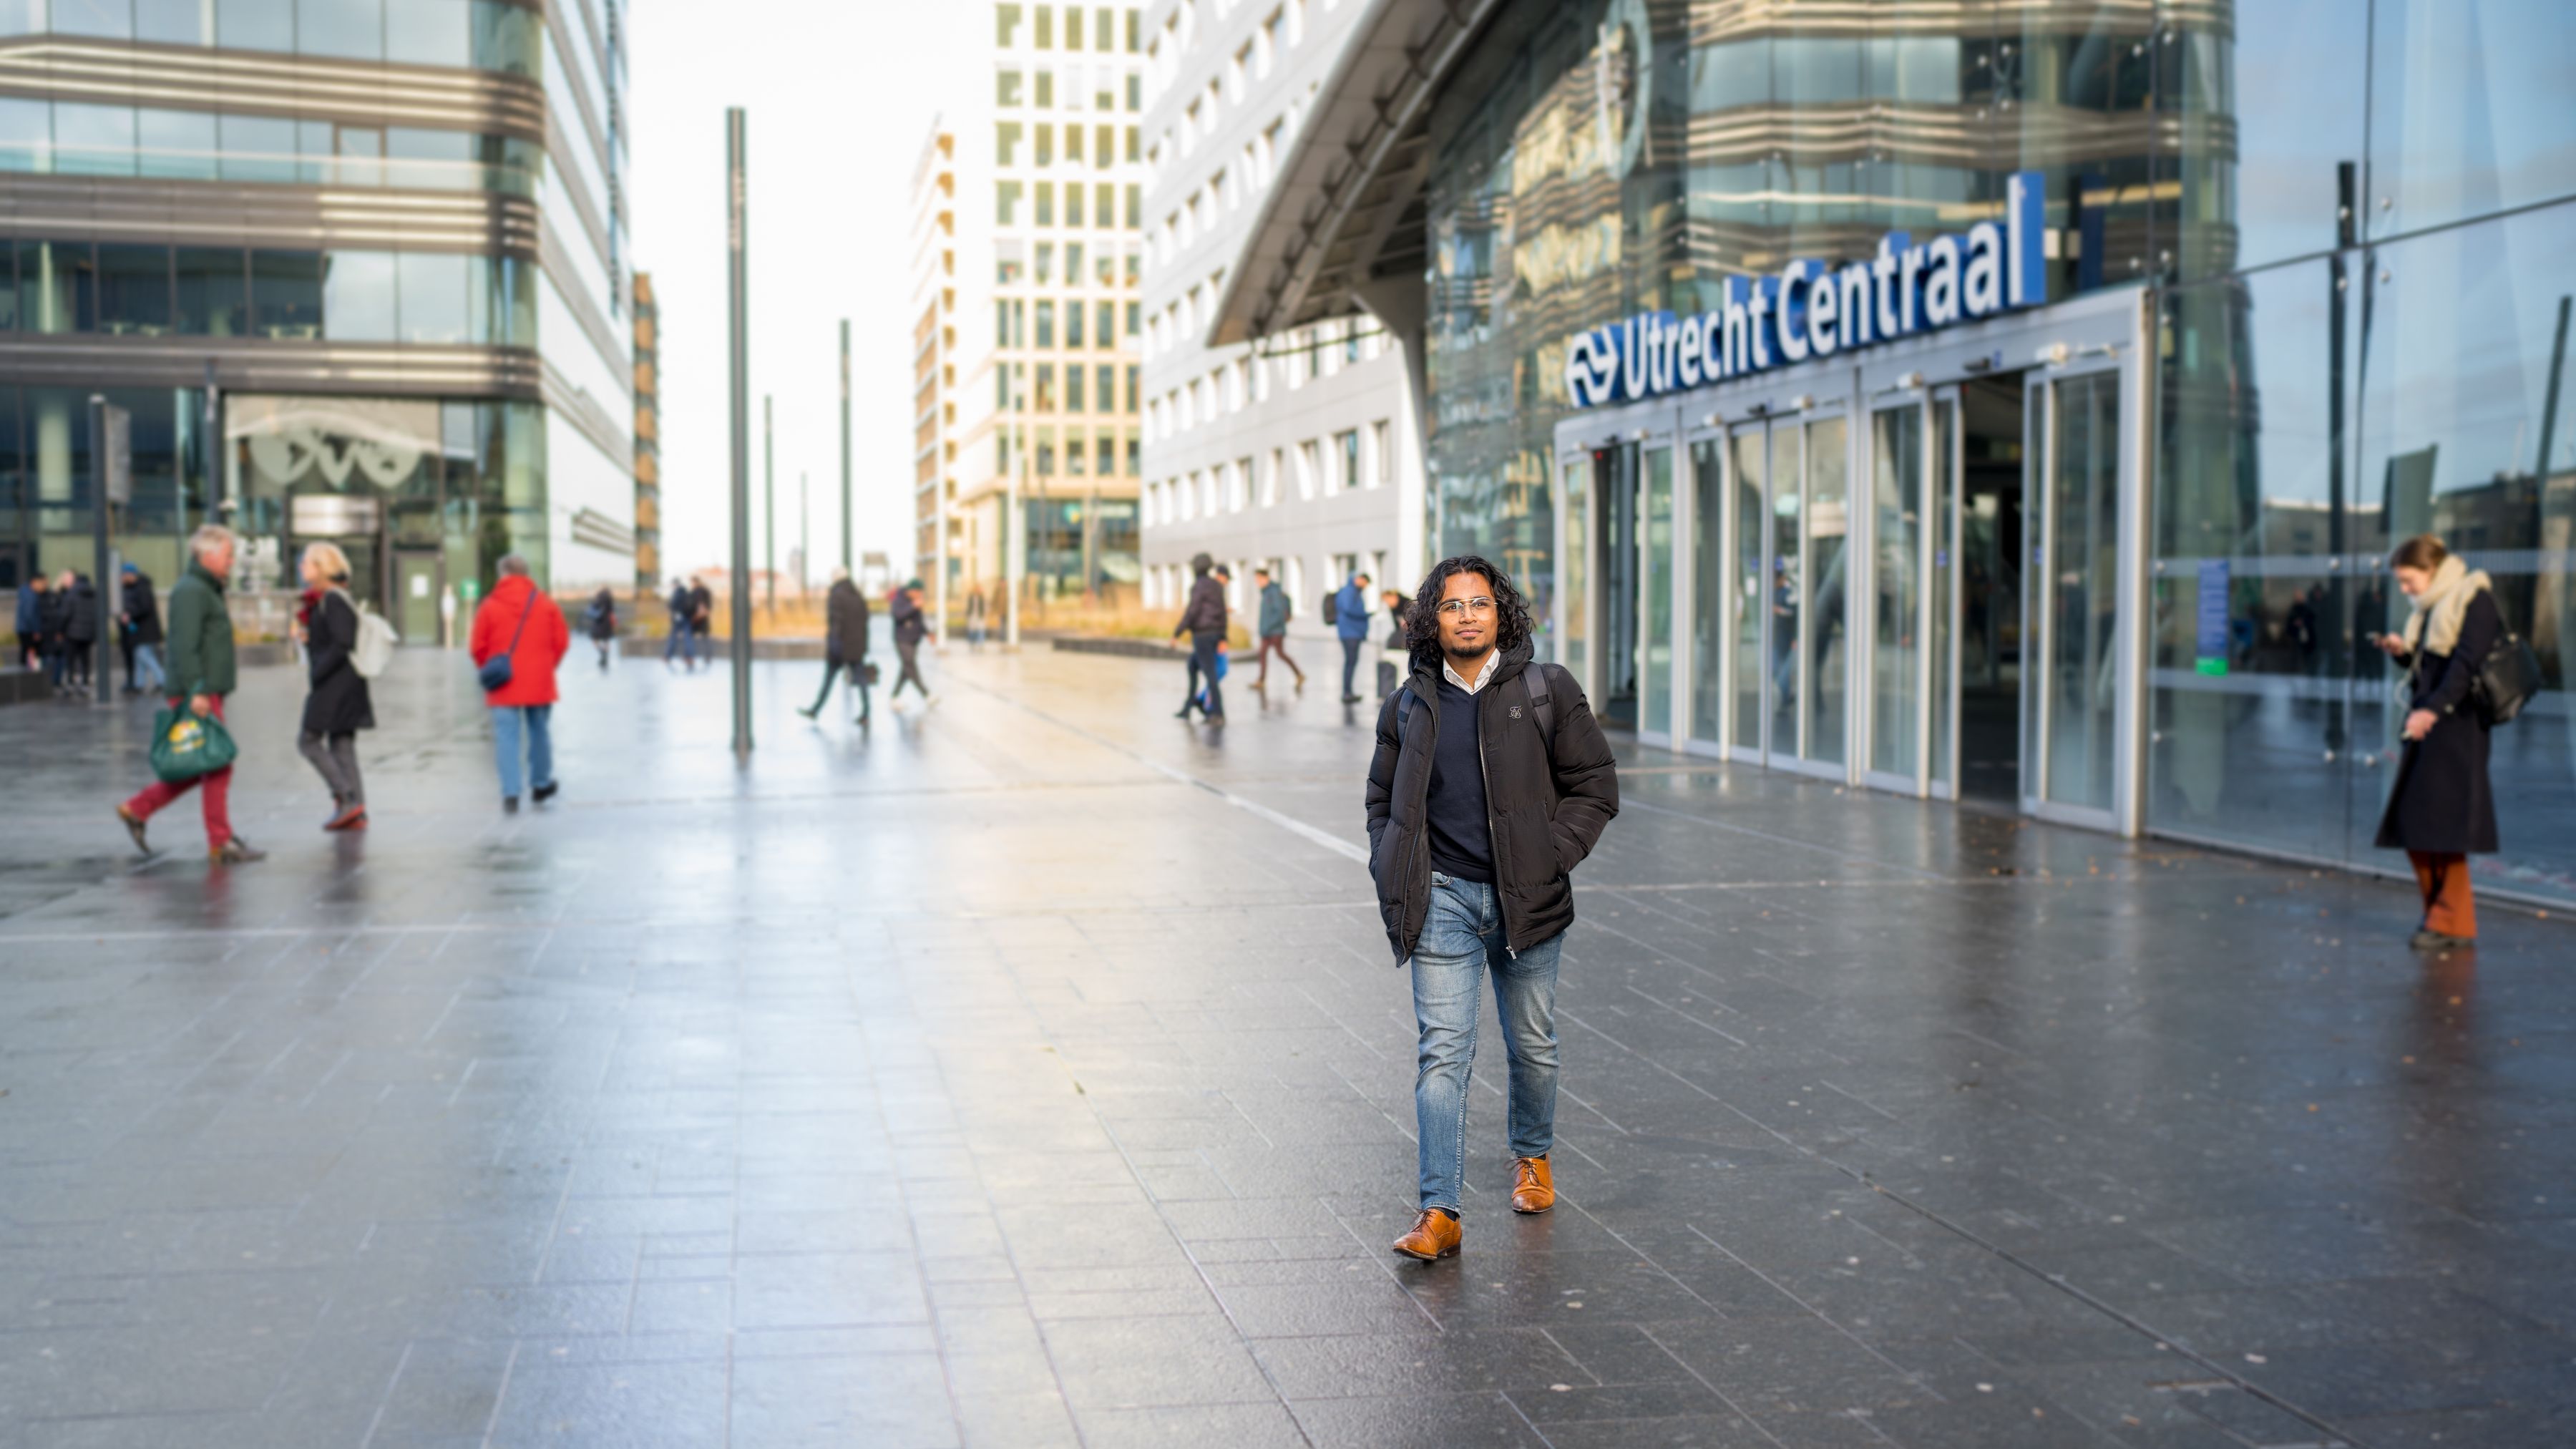 Aiji Loganathan is walking at the train station in Utrecht